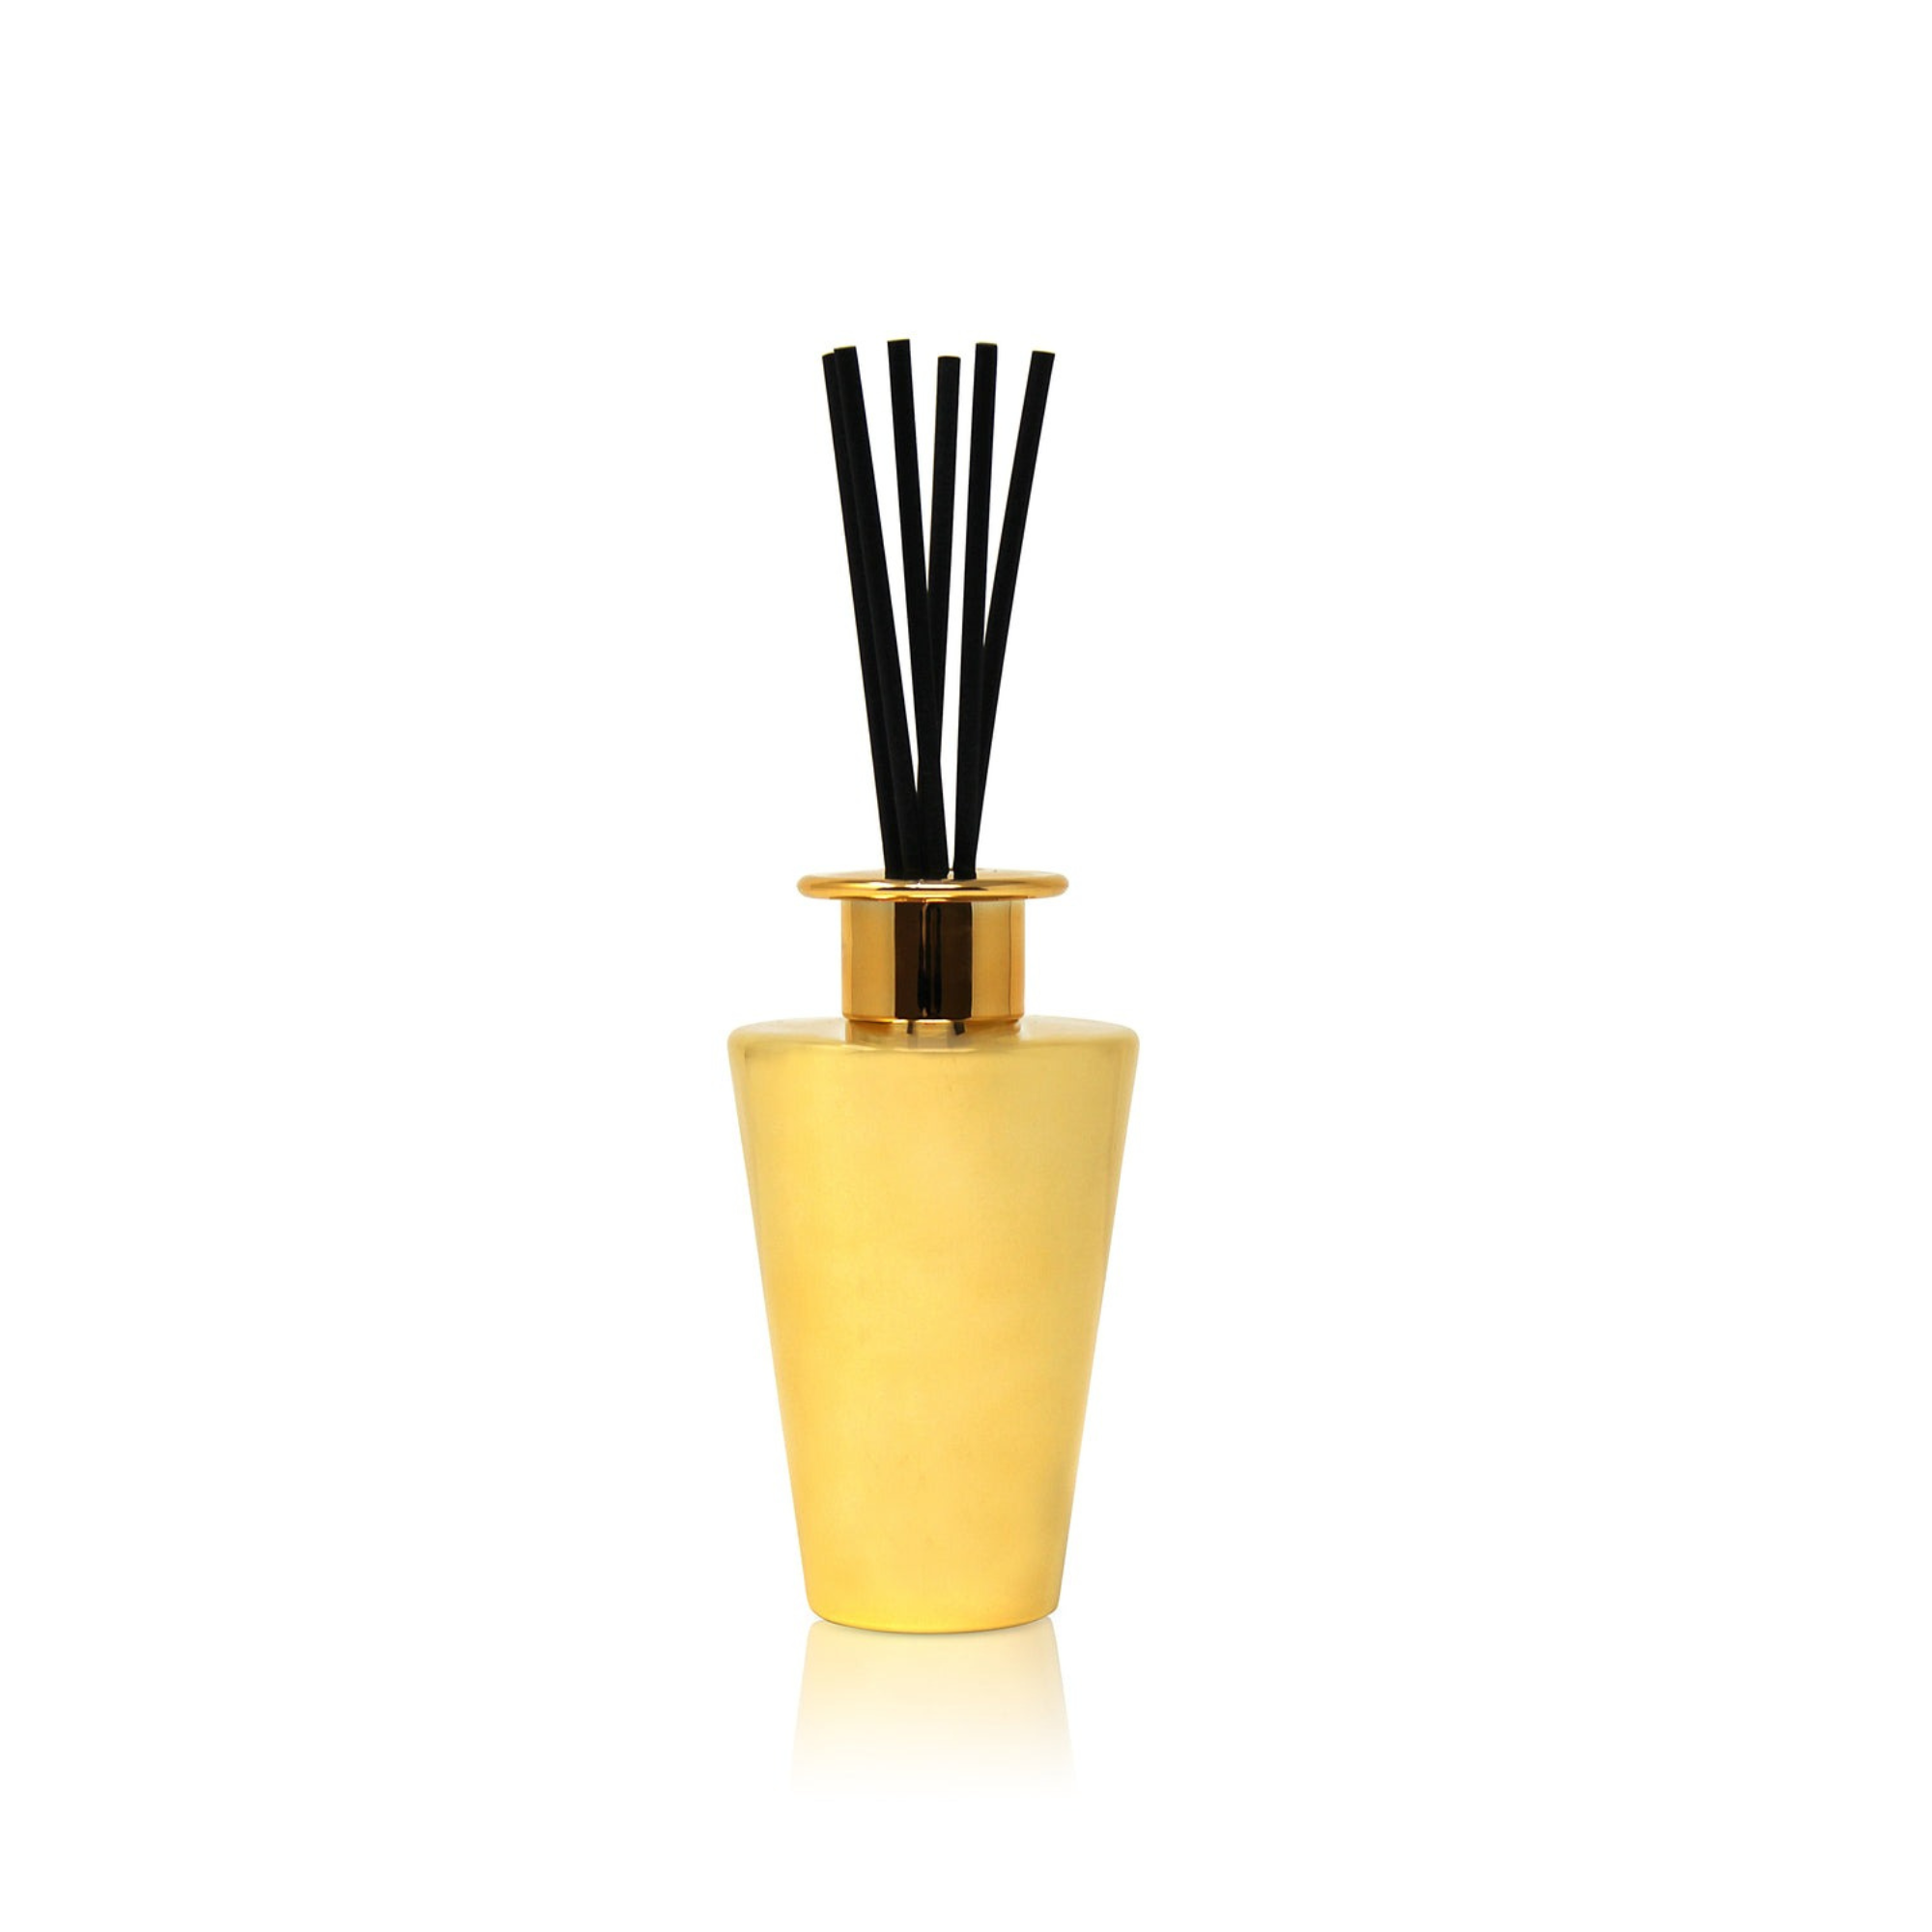 Polished Gold Reed Diffuser, "Zen Tea" Scent